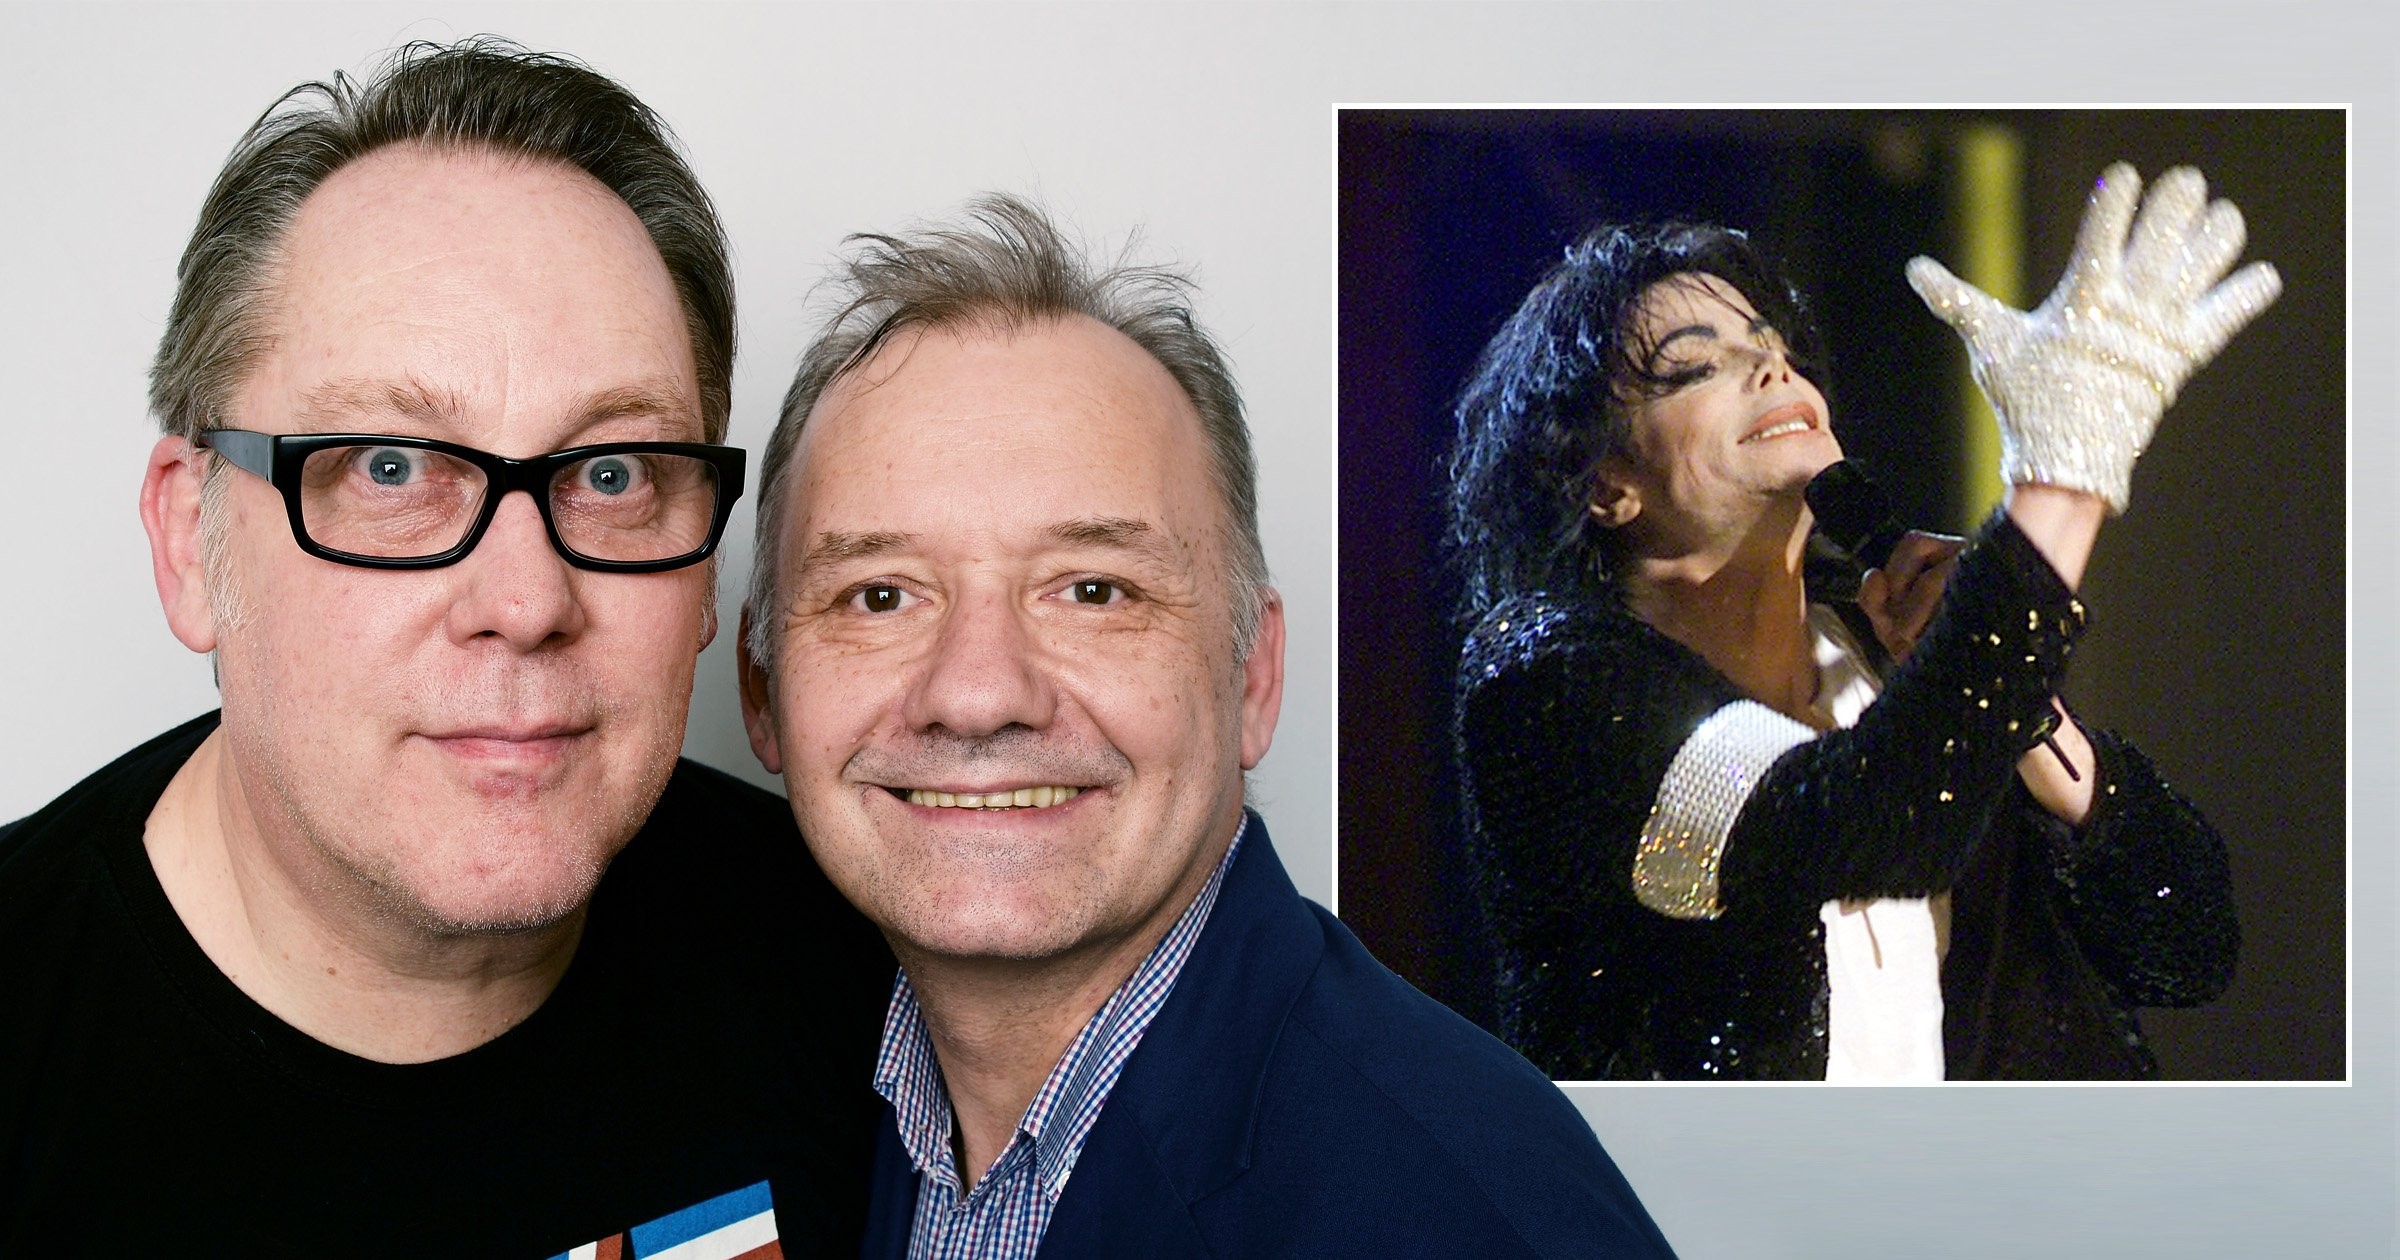 Yes, Bob Mortimer and Vic Reeves’ movie about Michael Jackson’s glove is going ahead